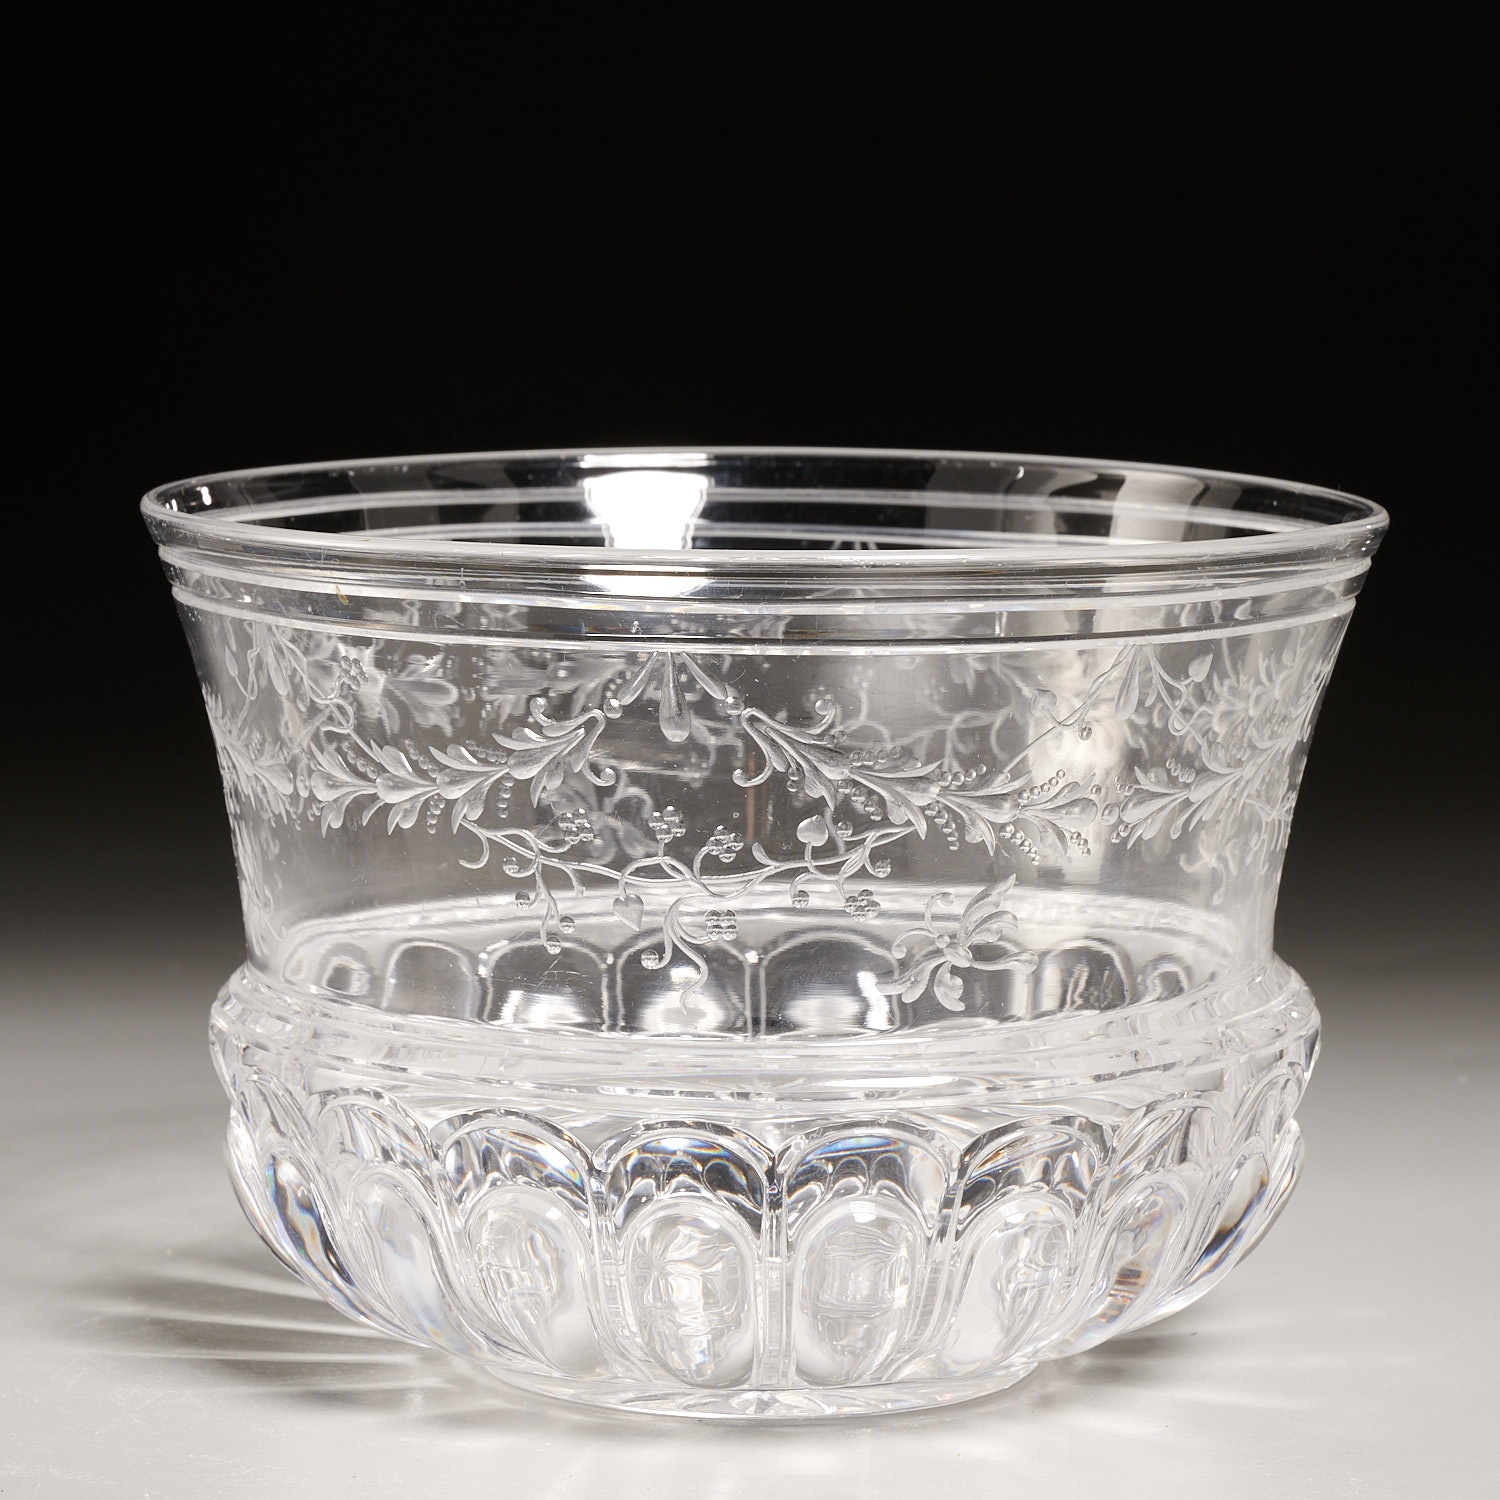 ANTIQUE BACCARAT ENGRAVED GLASS